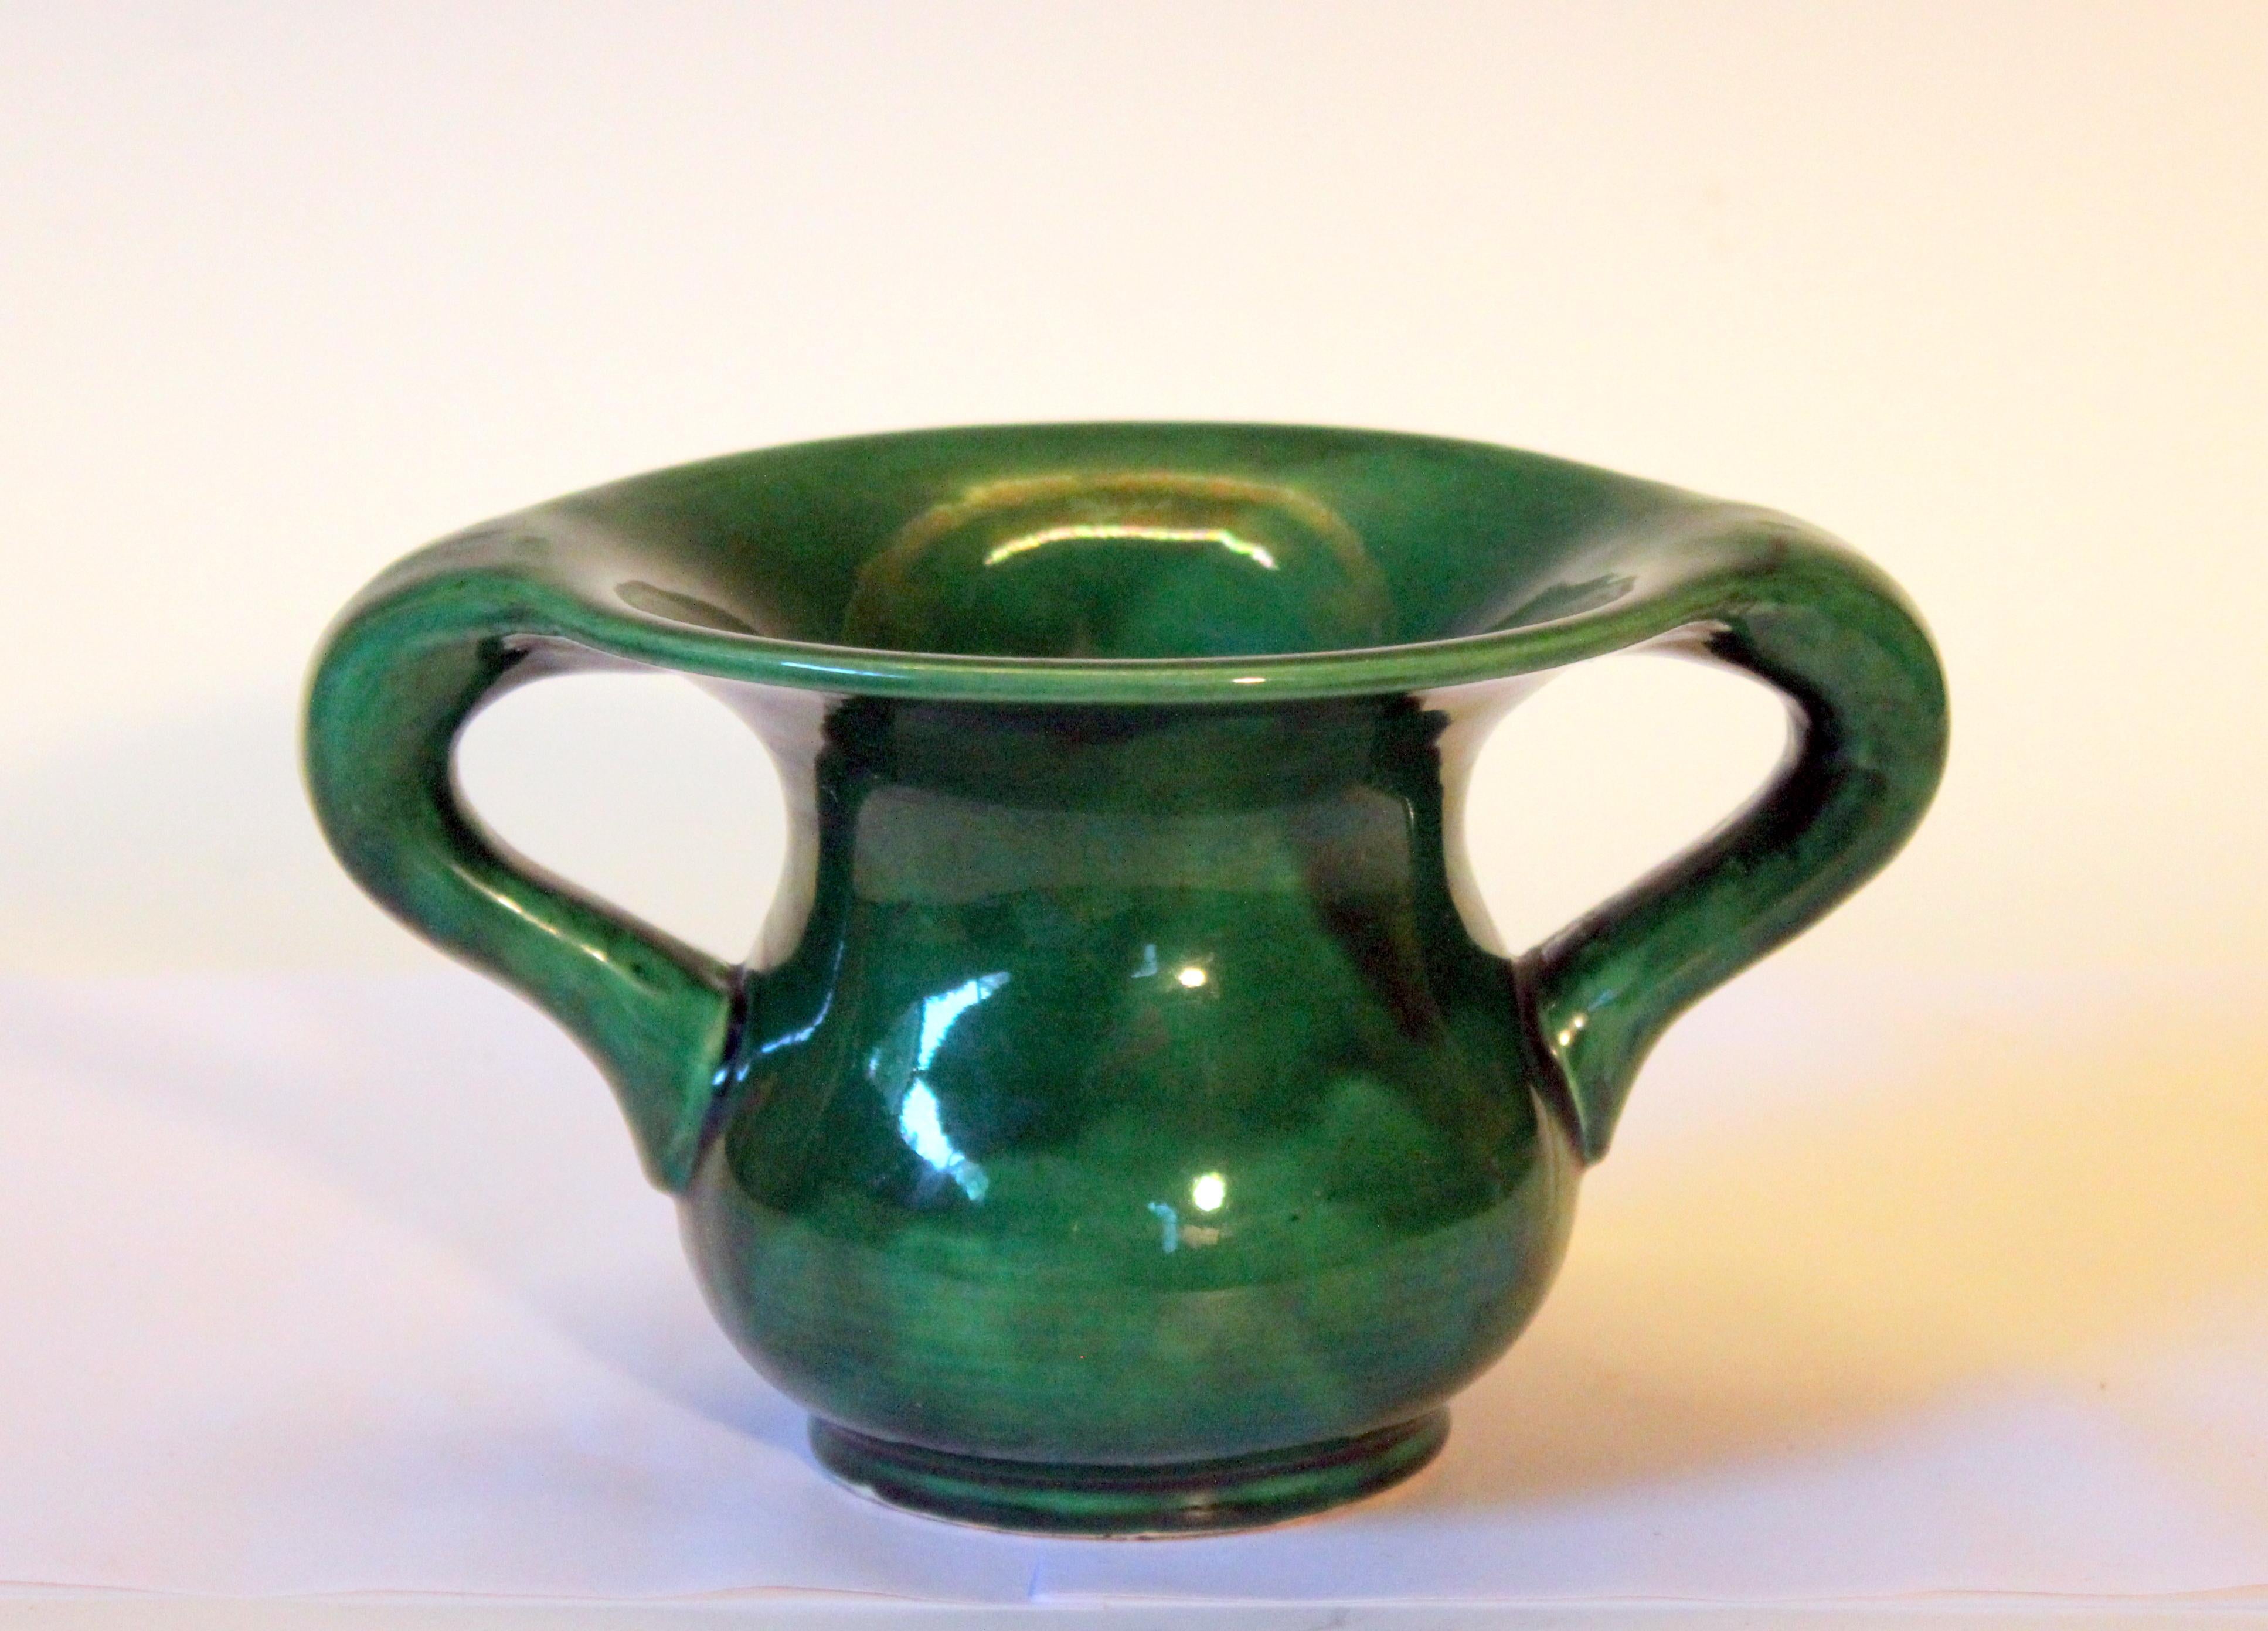 Awaji Pottery vase in flowing Art Nouveau form with curving handles and blooming mouthrim in magical green monochrome glaze, circa 1910s. Export label on base. Measures: 5